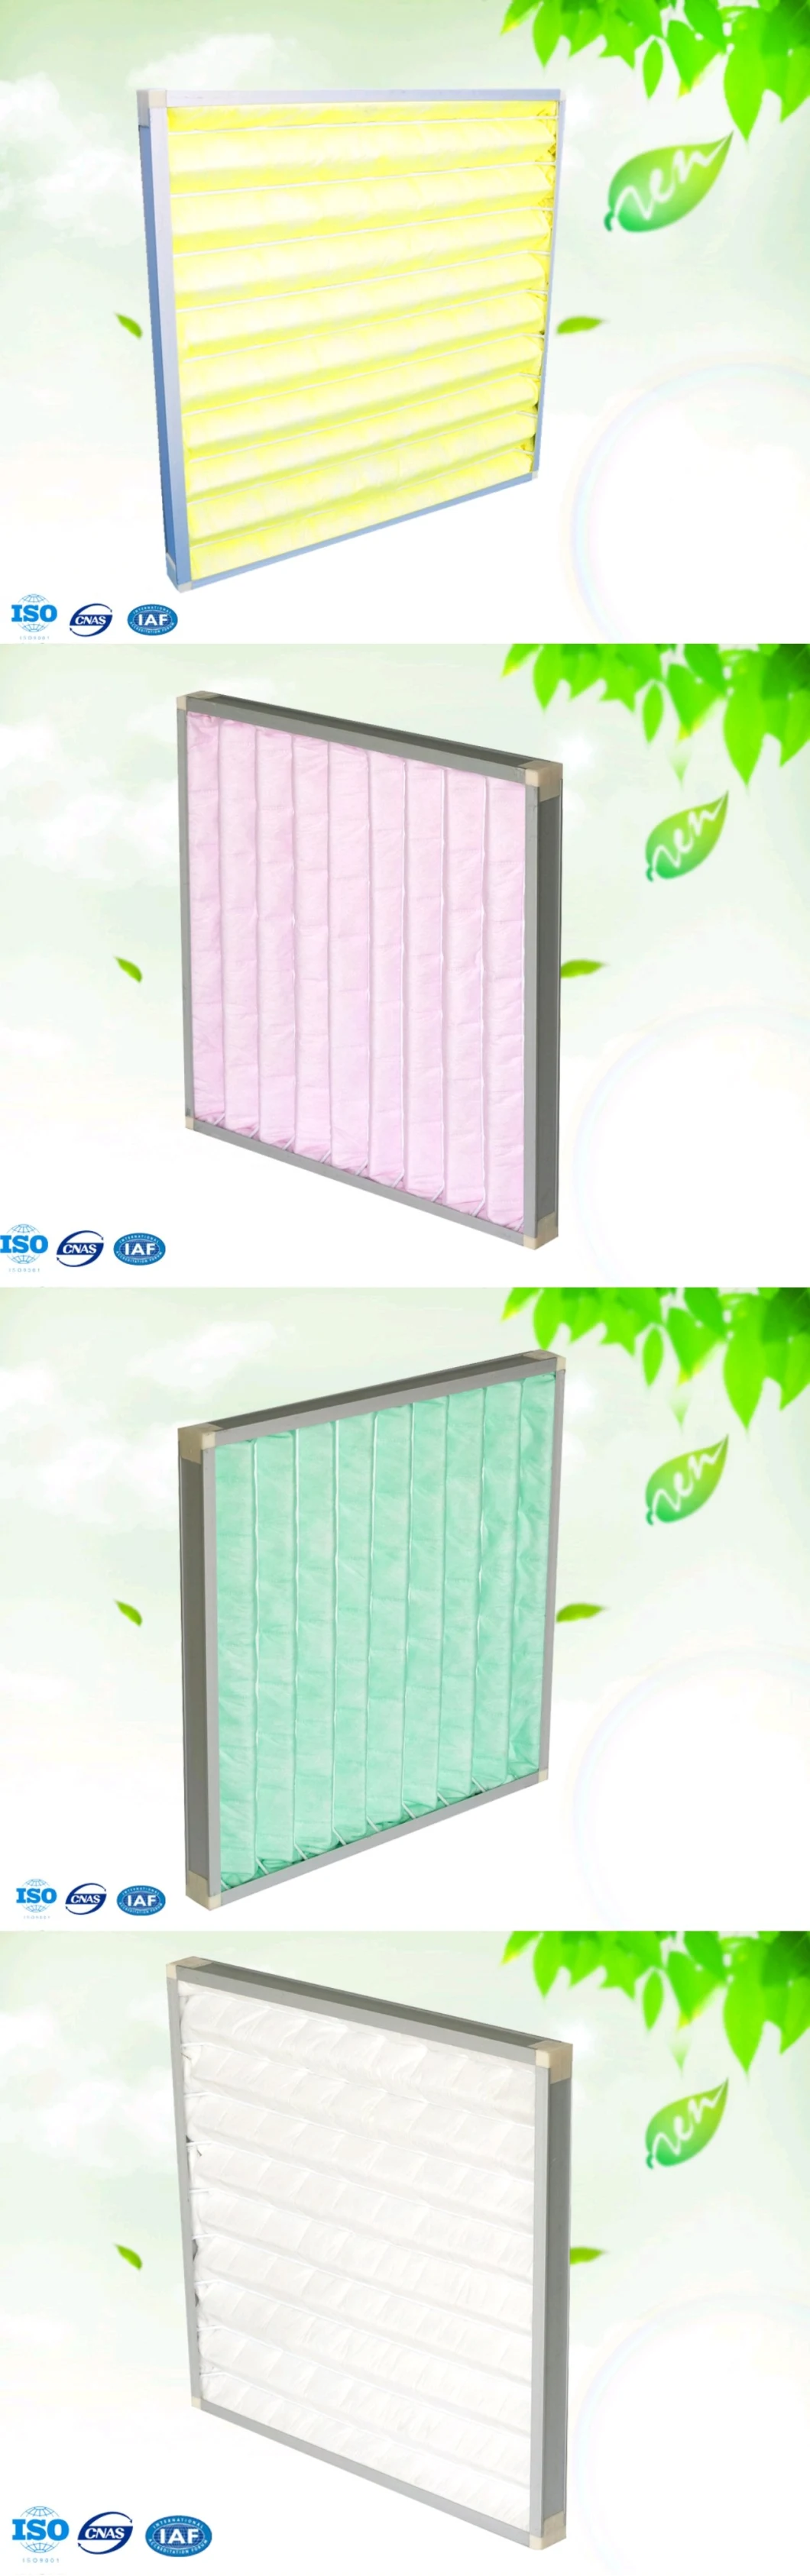 Panel Air Filter for Central Air Conditioning Ventilation System Intermediate Filtration